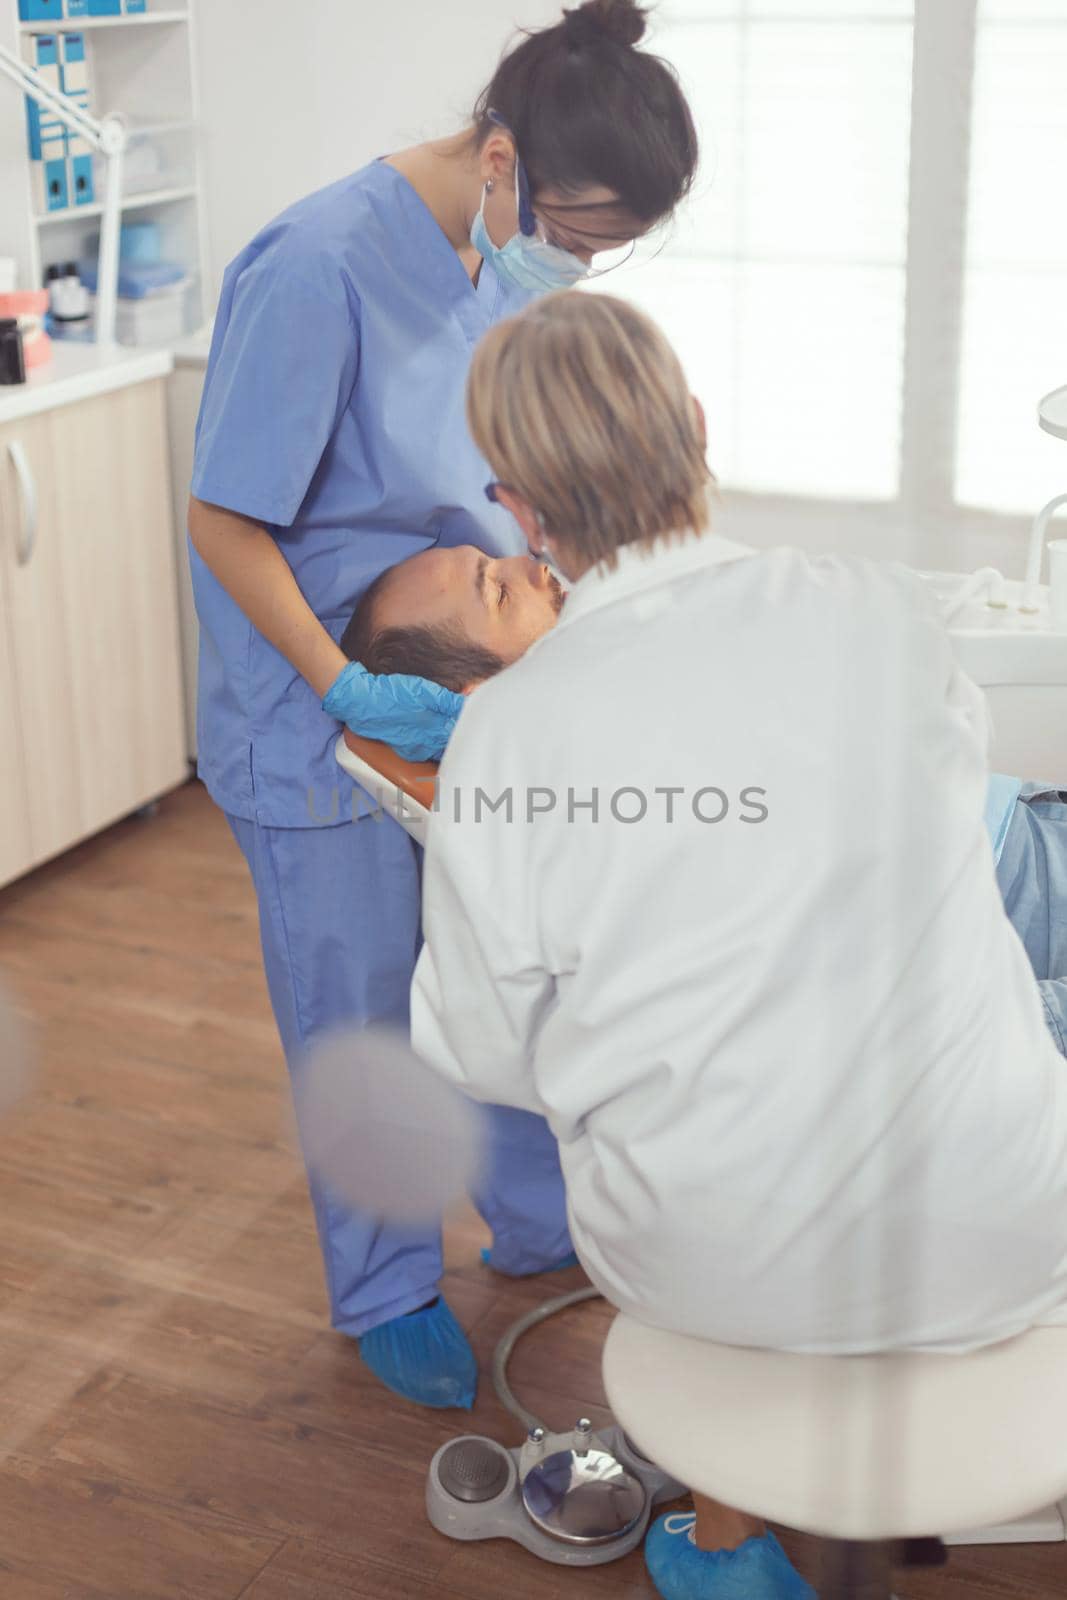 Sick patient sitting on stomatological chair with open mouth during dental examination. Senior woman stomatologist and medical nurse with masks holding sterilized tools checking teeth health